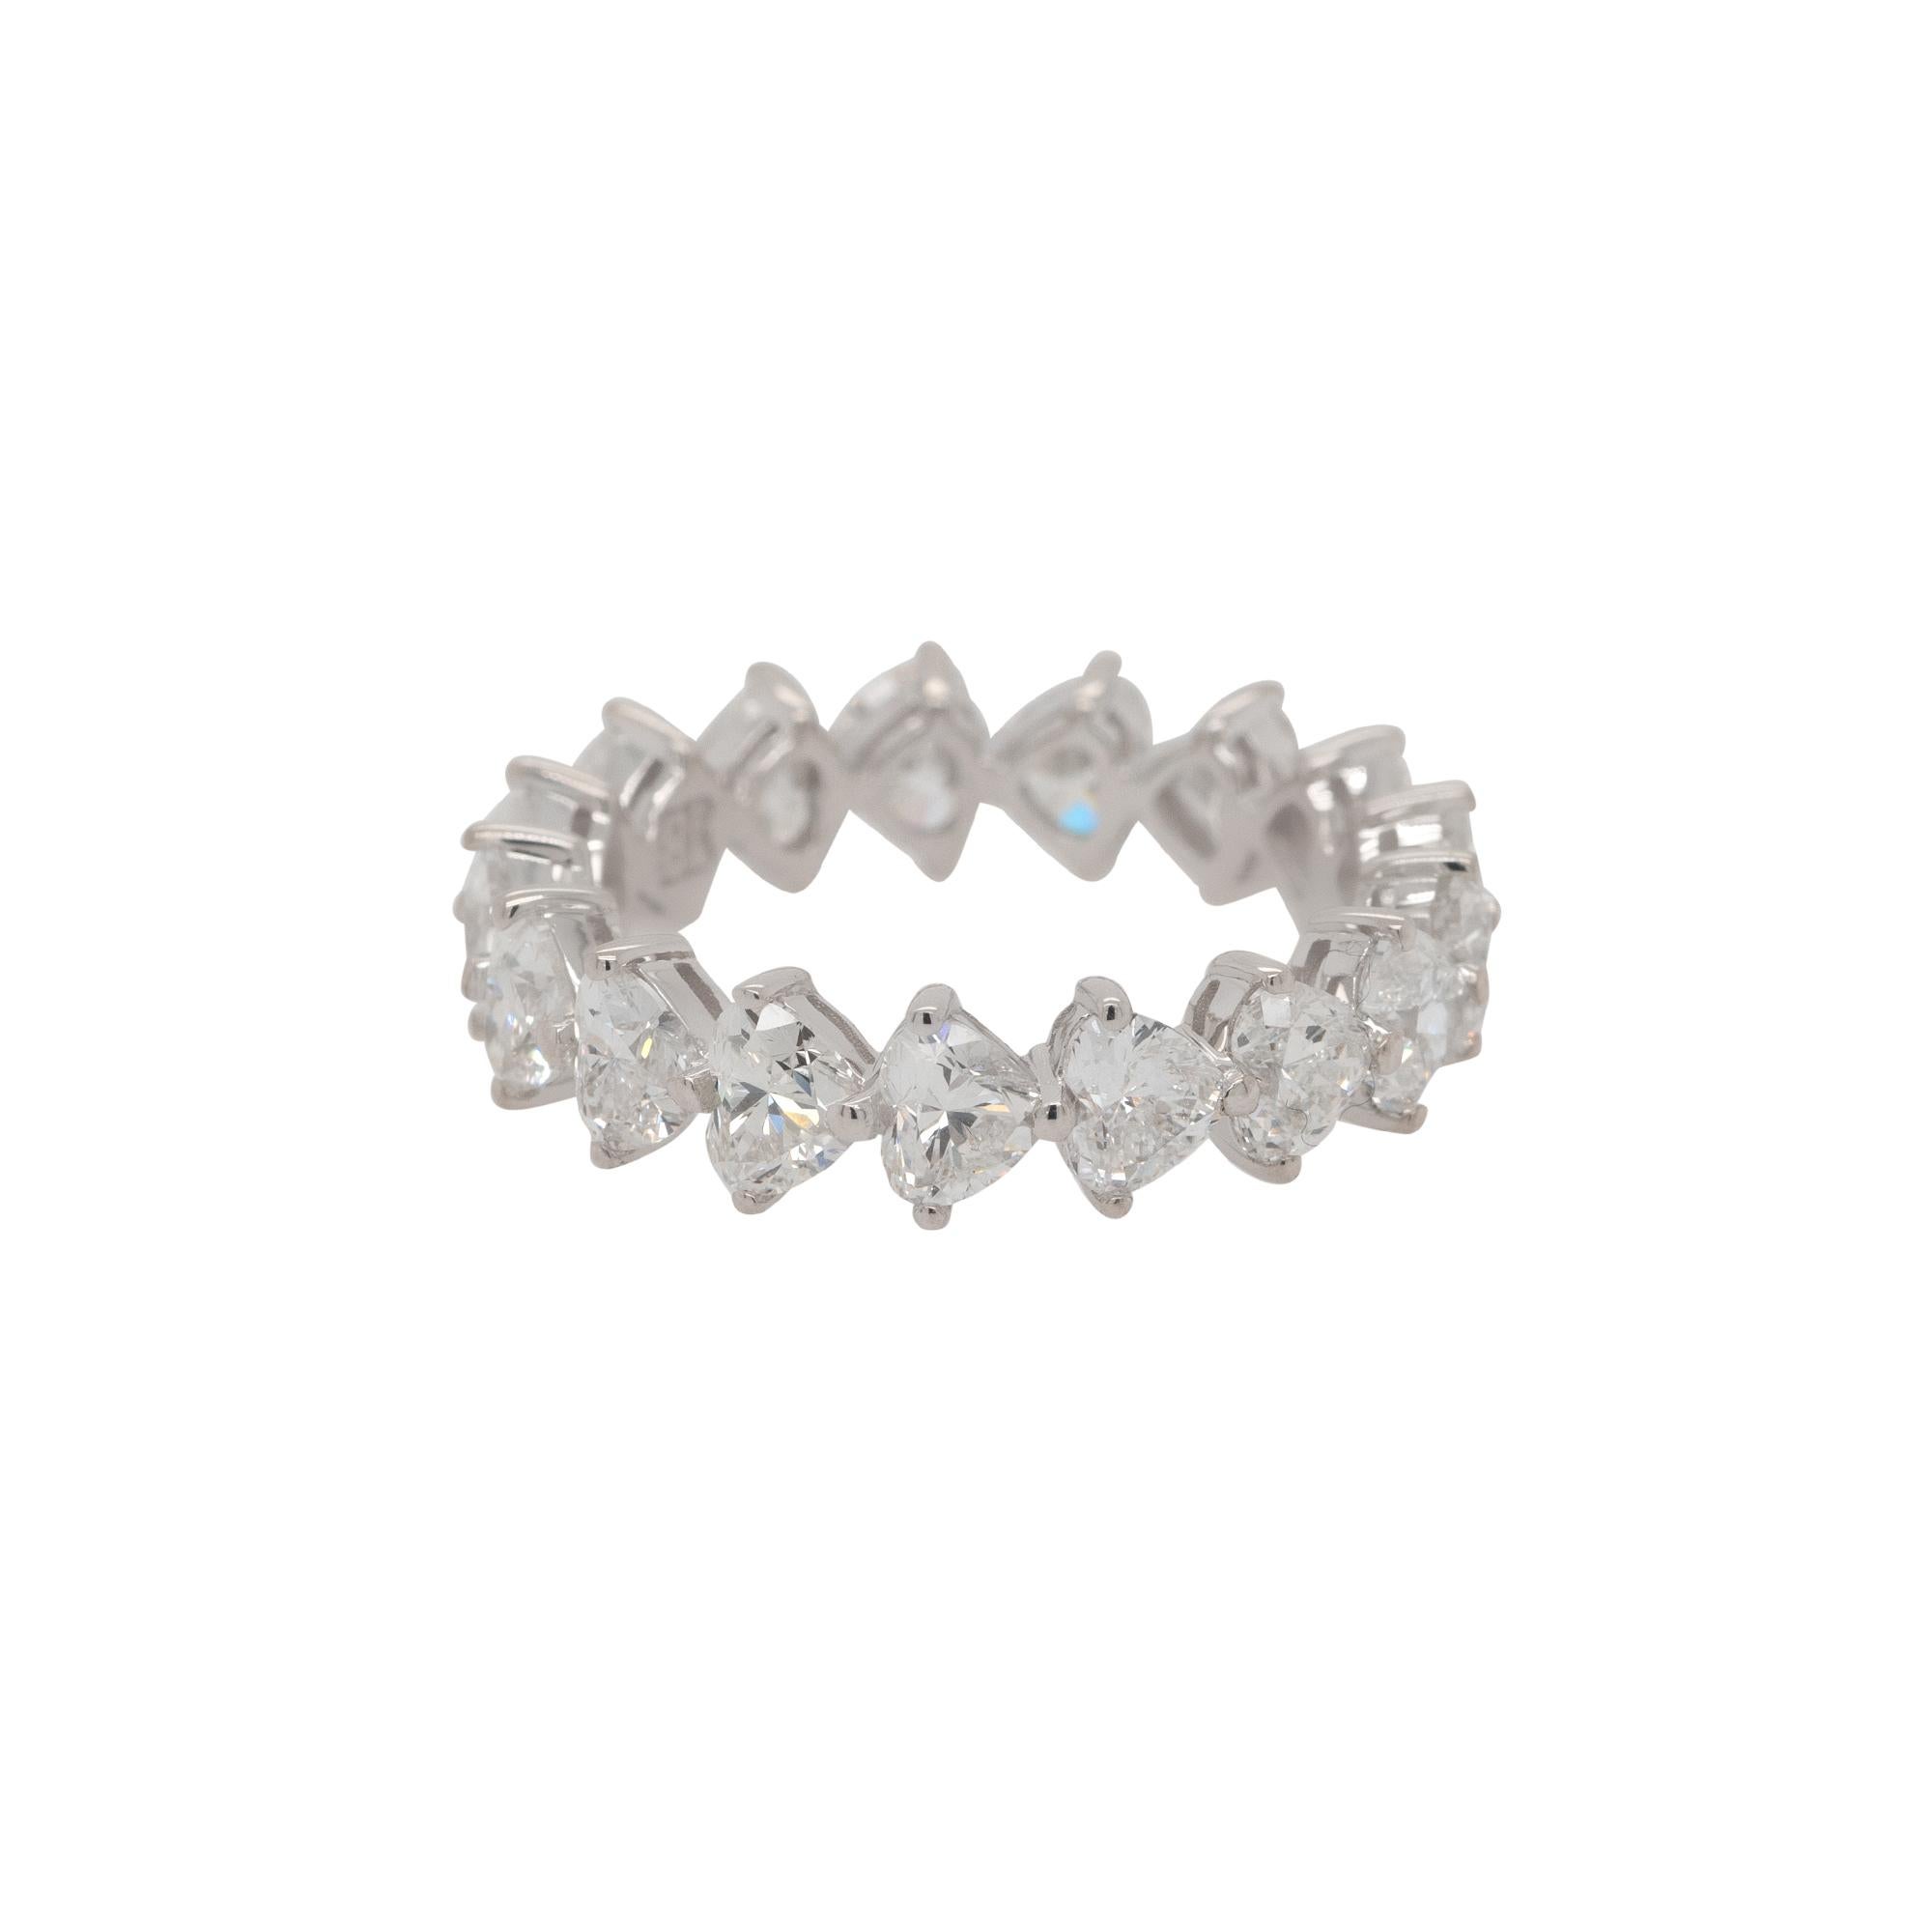 Material: 18k White Gold
Diamond Details: Approx. 4.12ctw of natural trillion cut Diamonds. Diamonds are G/H in color and VS in clarity
Ring Measurements: 22mm x 5mm x 22mm
Ring Size: 6.5 
Total Weight: 3.4g (2.2dwt)
Additional Details: This item